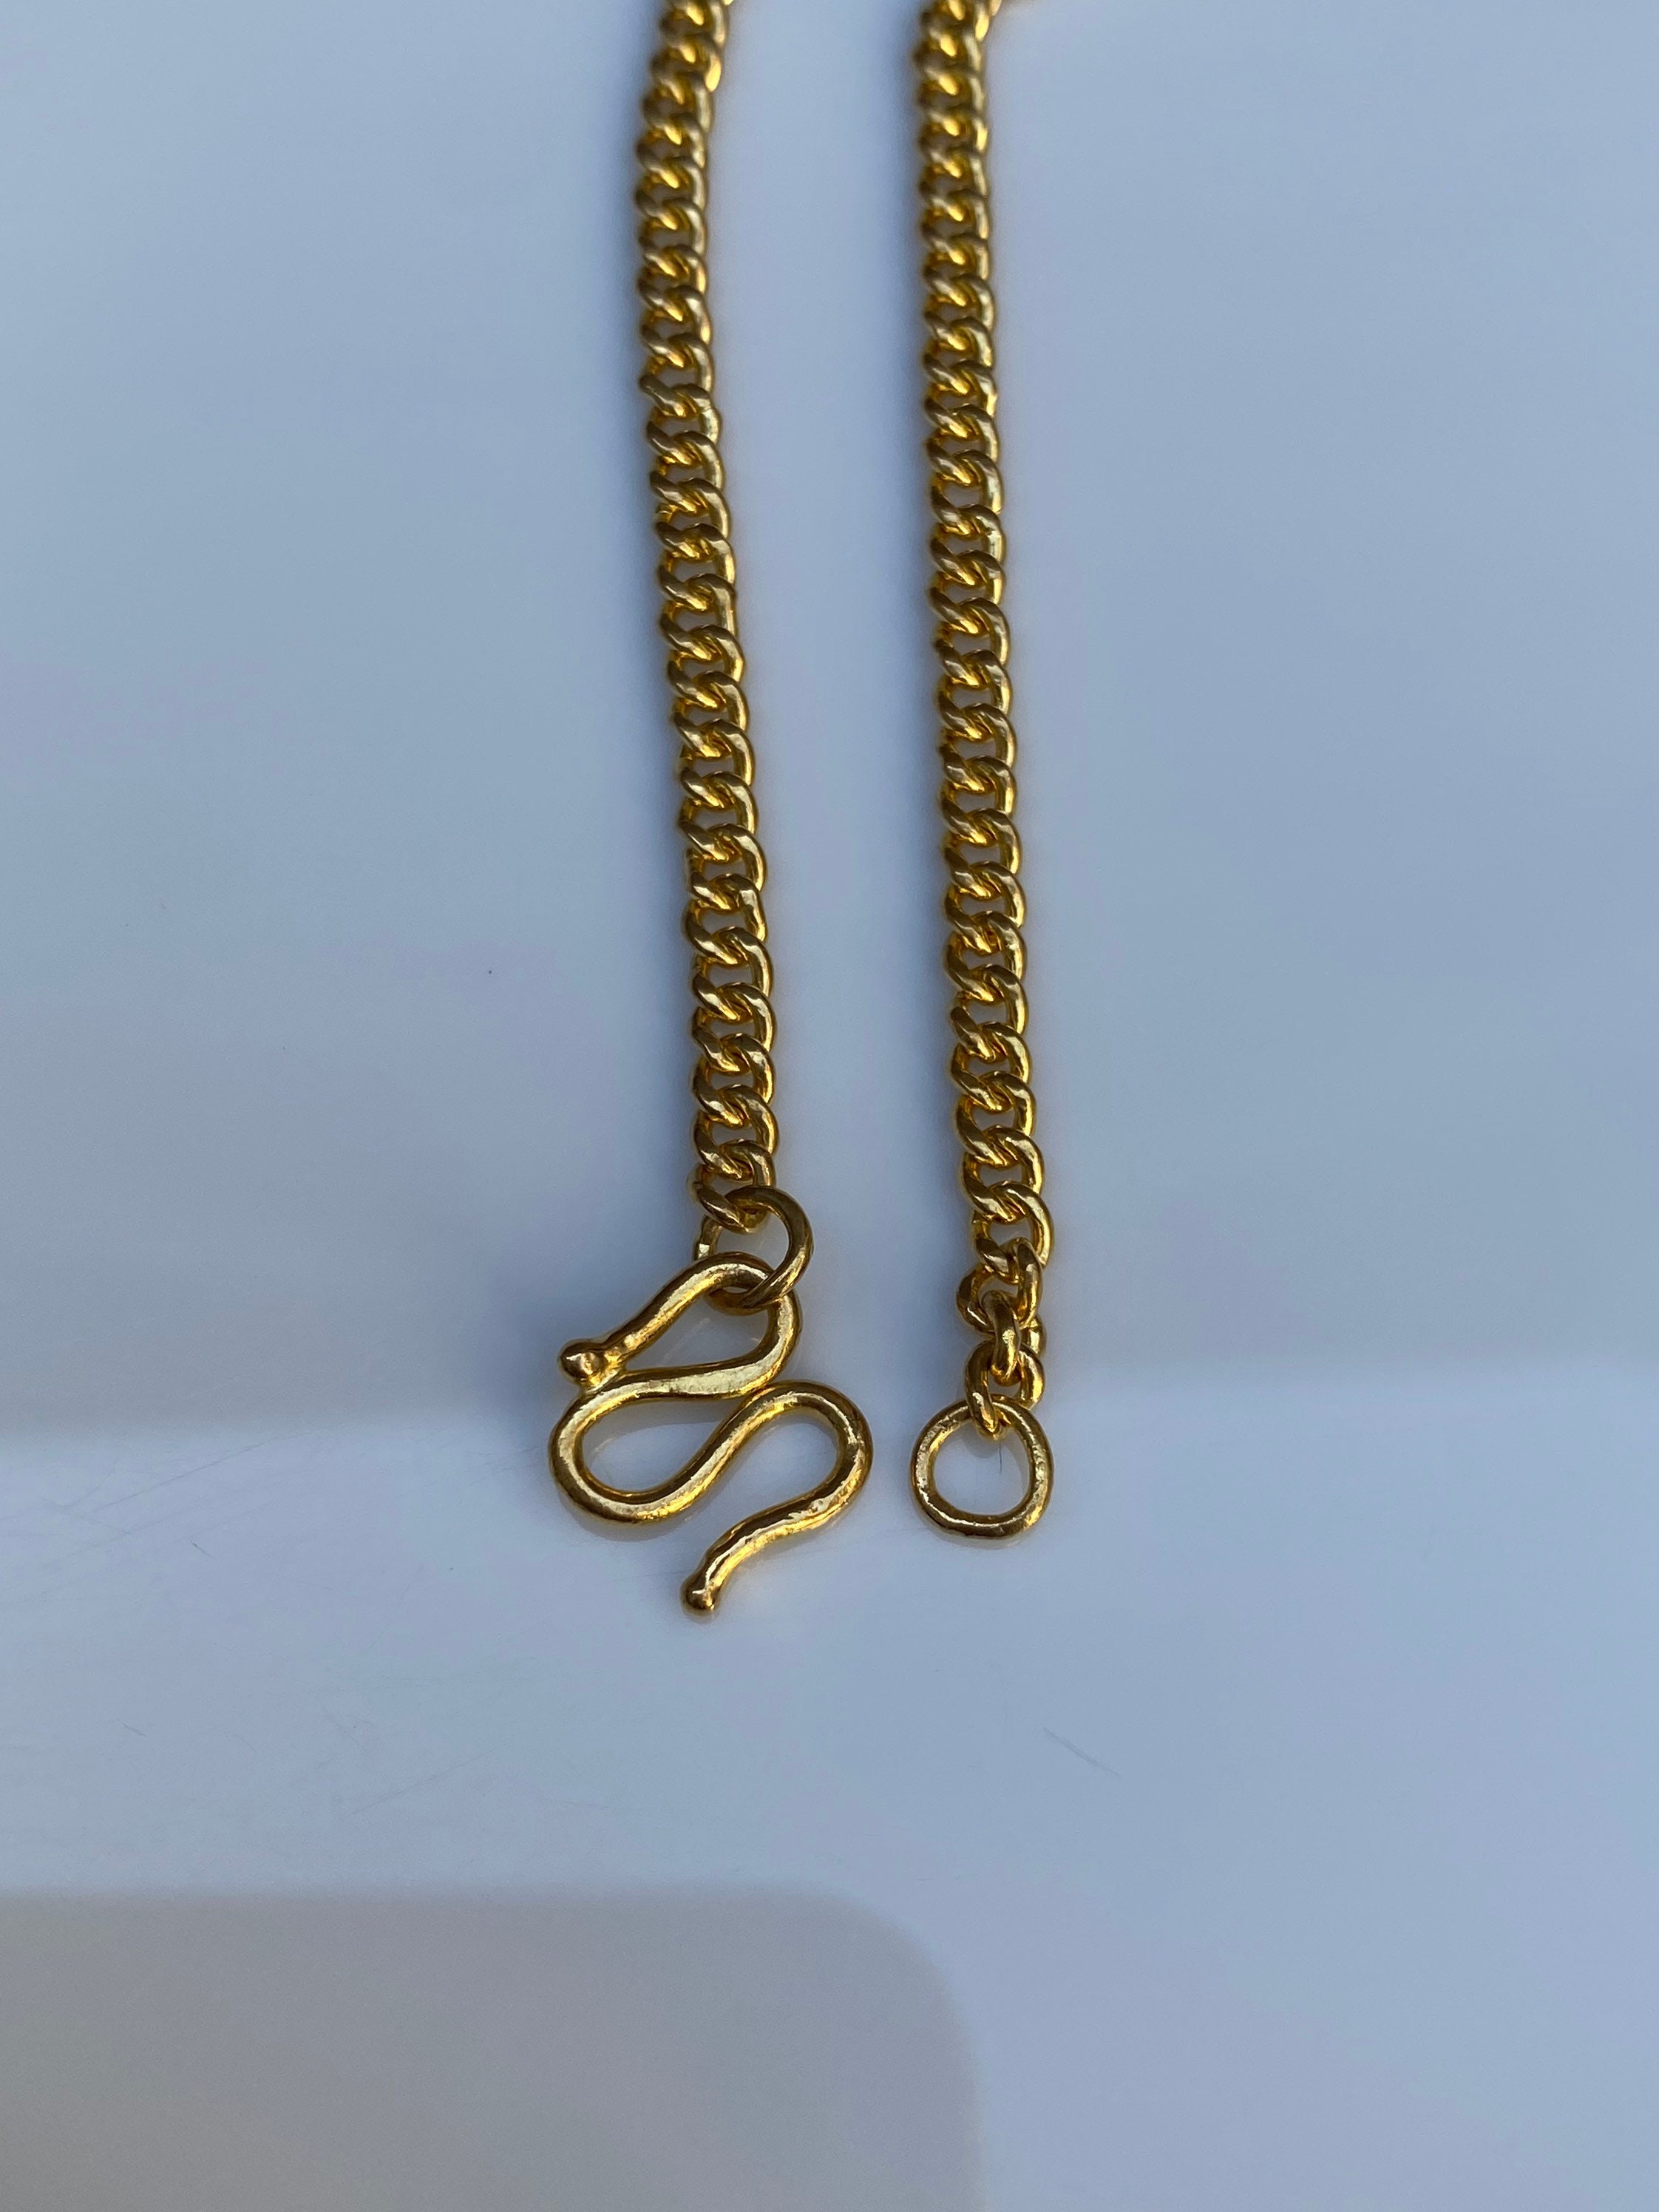 Real 24k Yellow Gold S Shape Clasp M Clasp Circle With Circle Can Suit For  Necklace Pure Chain